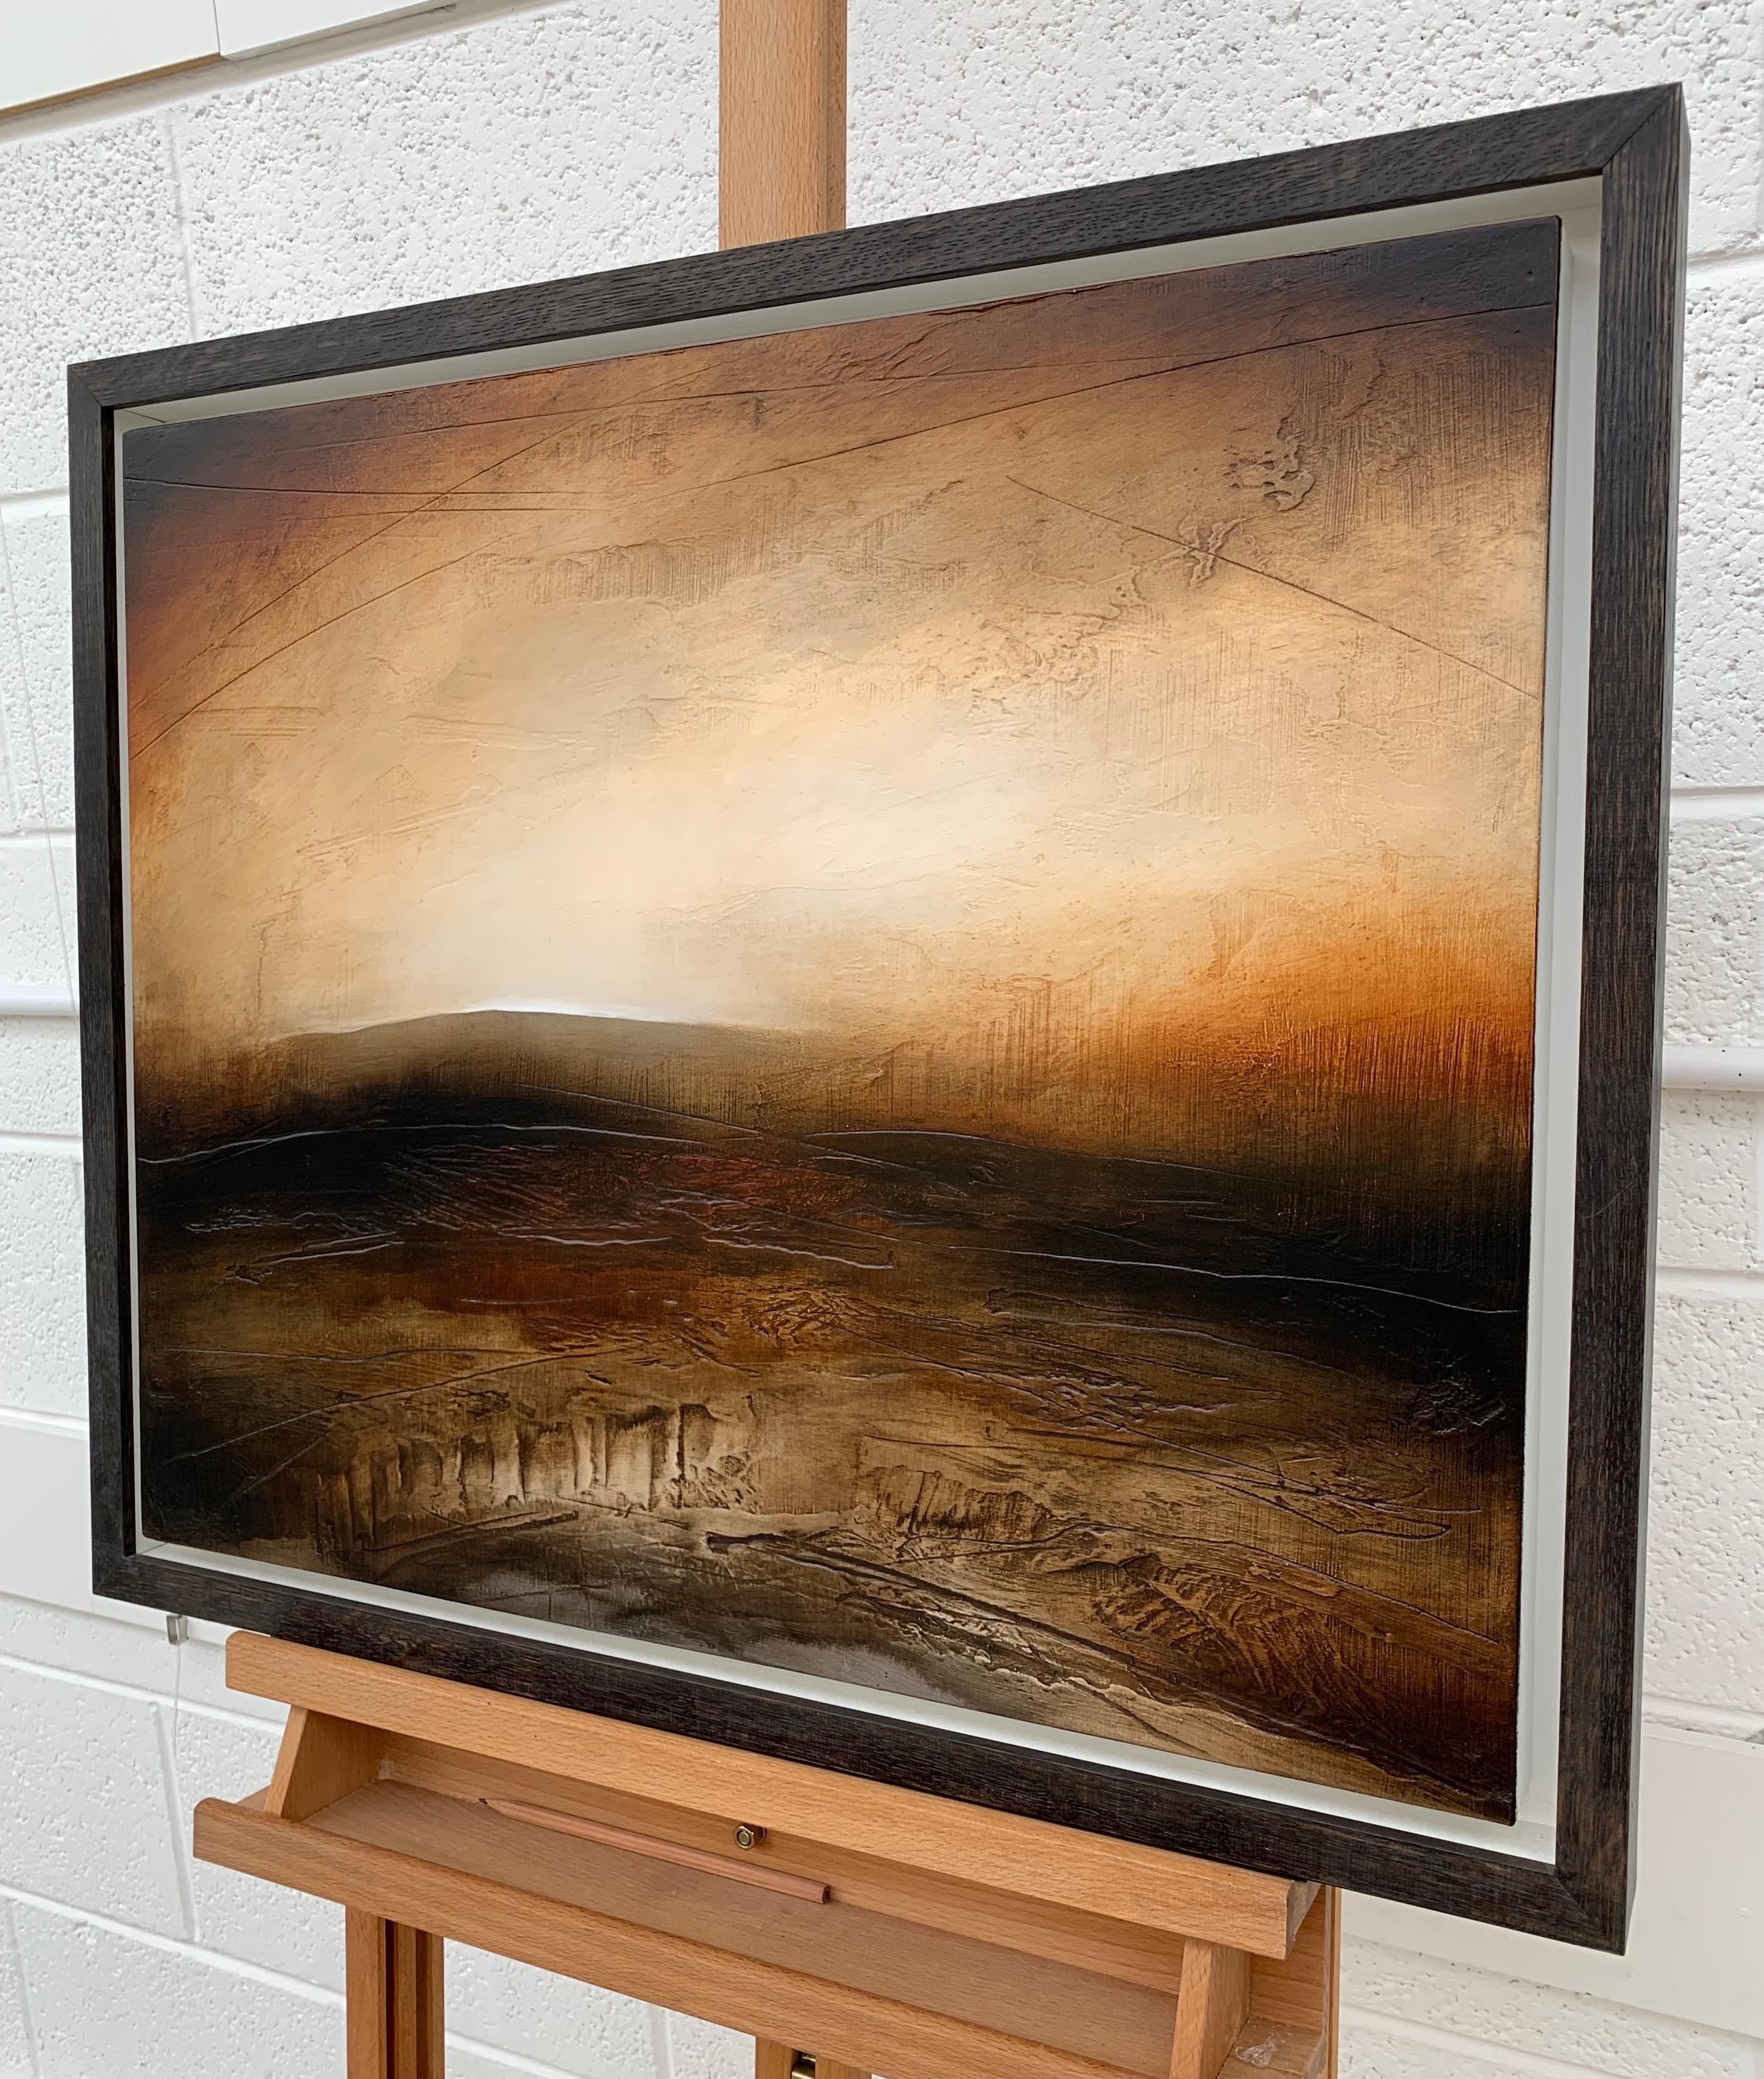 Atmospheric Abstract Landscape Painting of British Moorland with Earthy Tones, entitled 'The Oldest Hill', by English Artist Paul Denham. Paul starts to paint by applying a ground into which he carves linear markings. These lines give the surface an